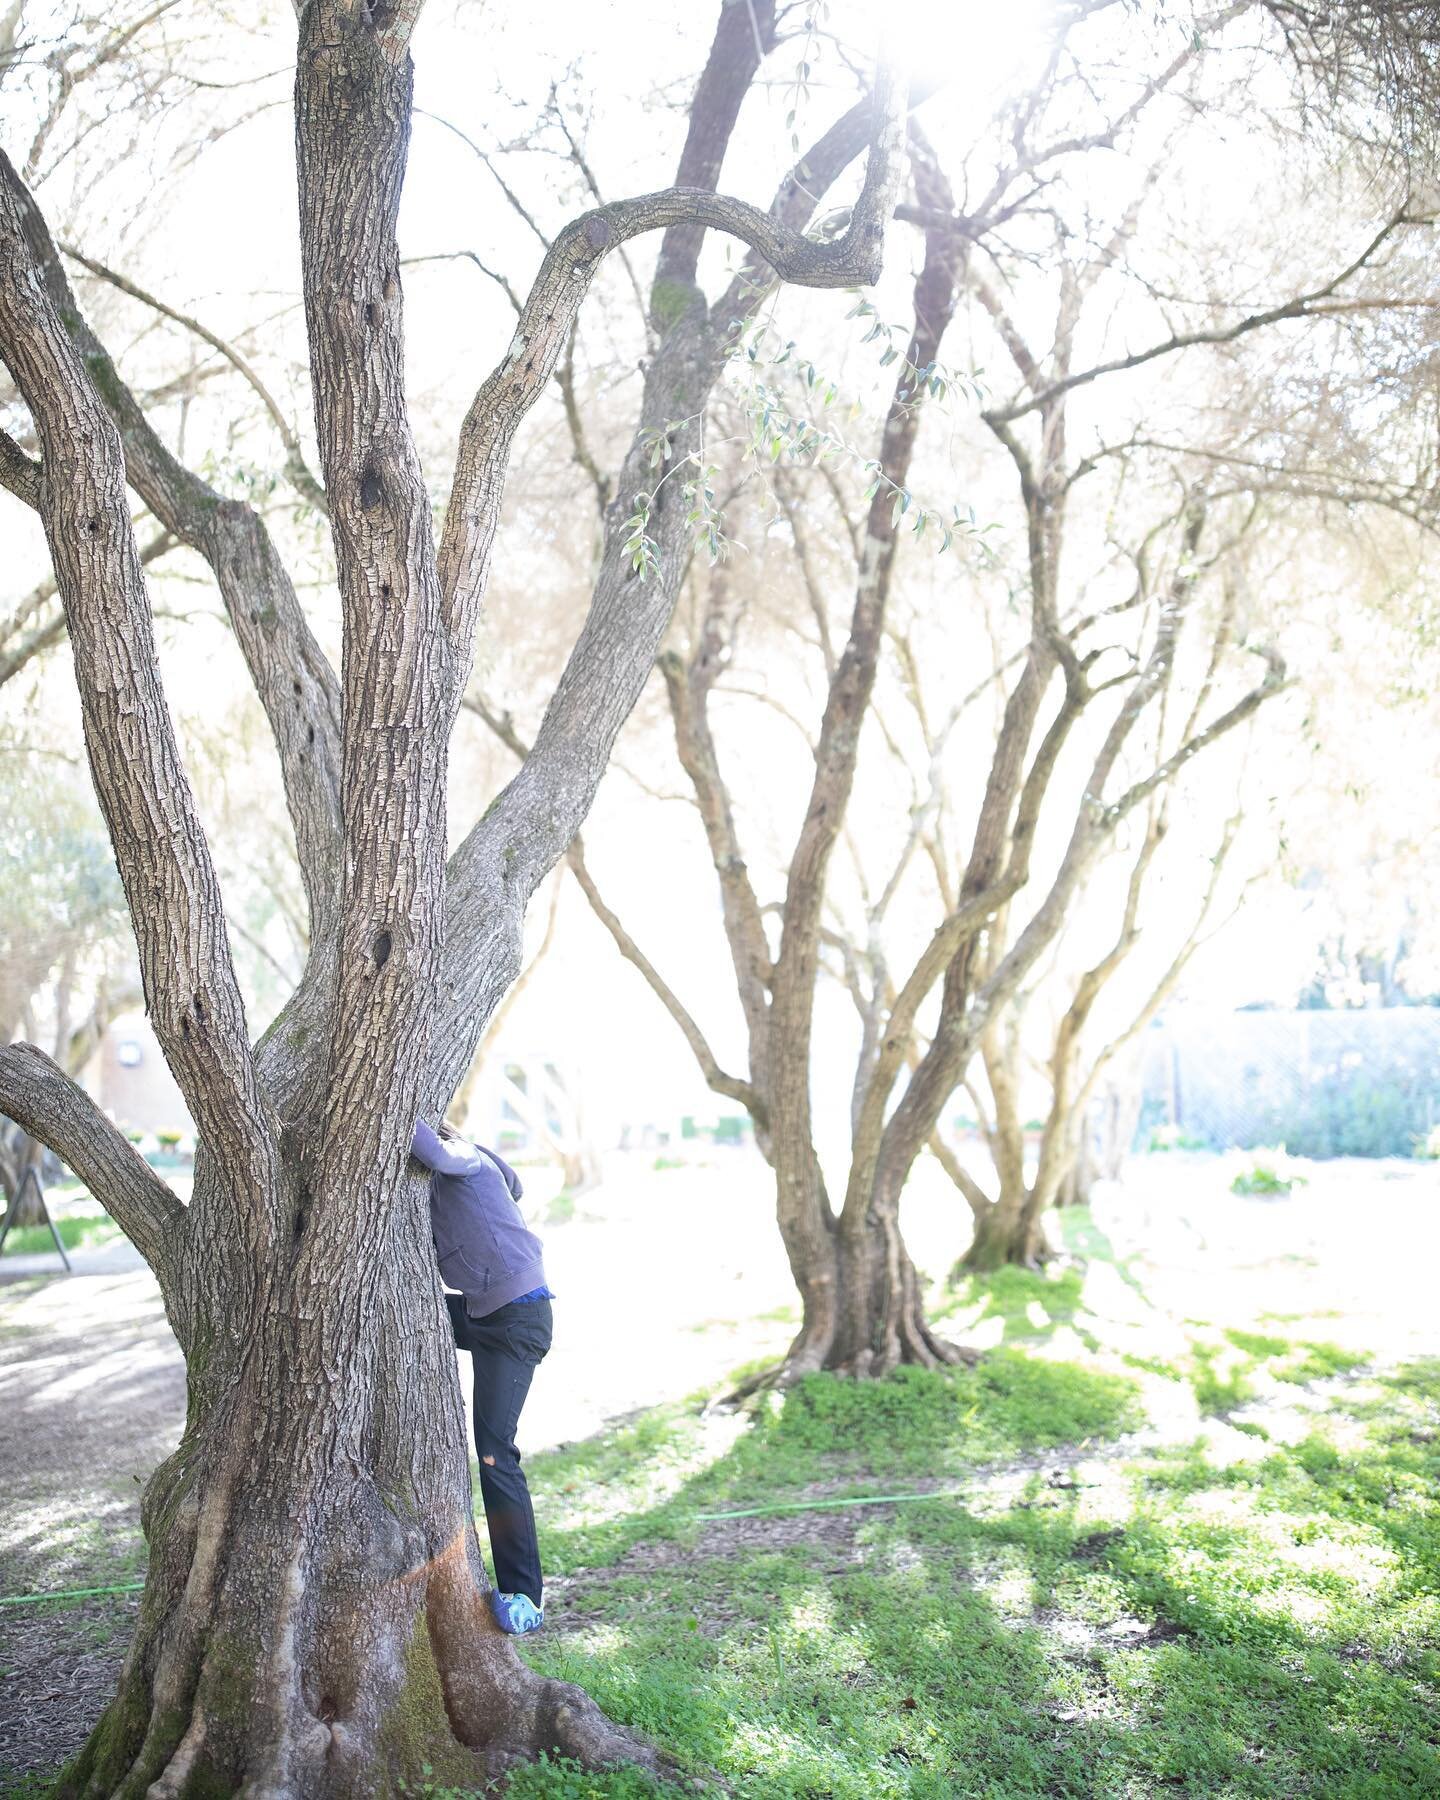 Is April Fools&rsquo; Day over? I like to hide out because I&rsquo;m so gullible￼! What are your favorites from yesterday- or previous years? #aprilfools #filoli #climbatree #vitaminN